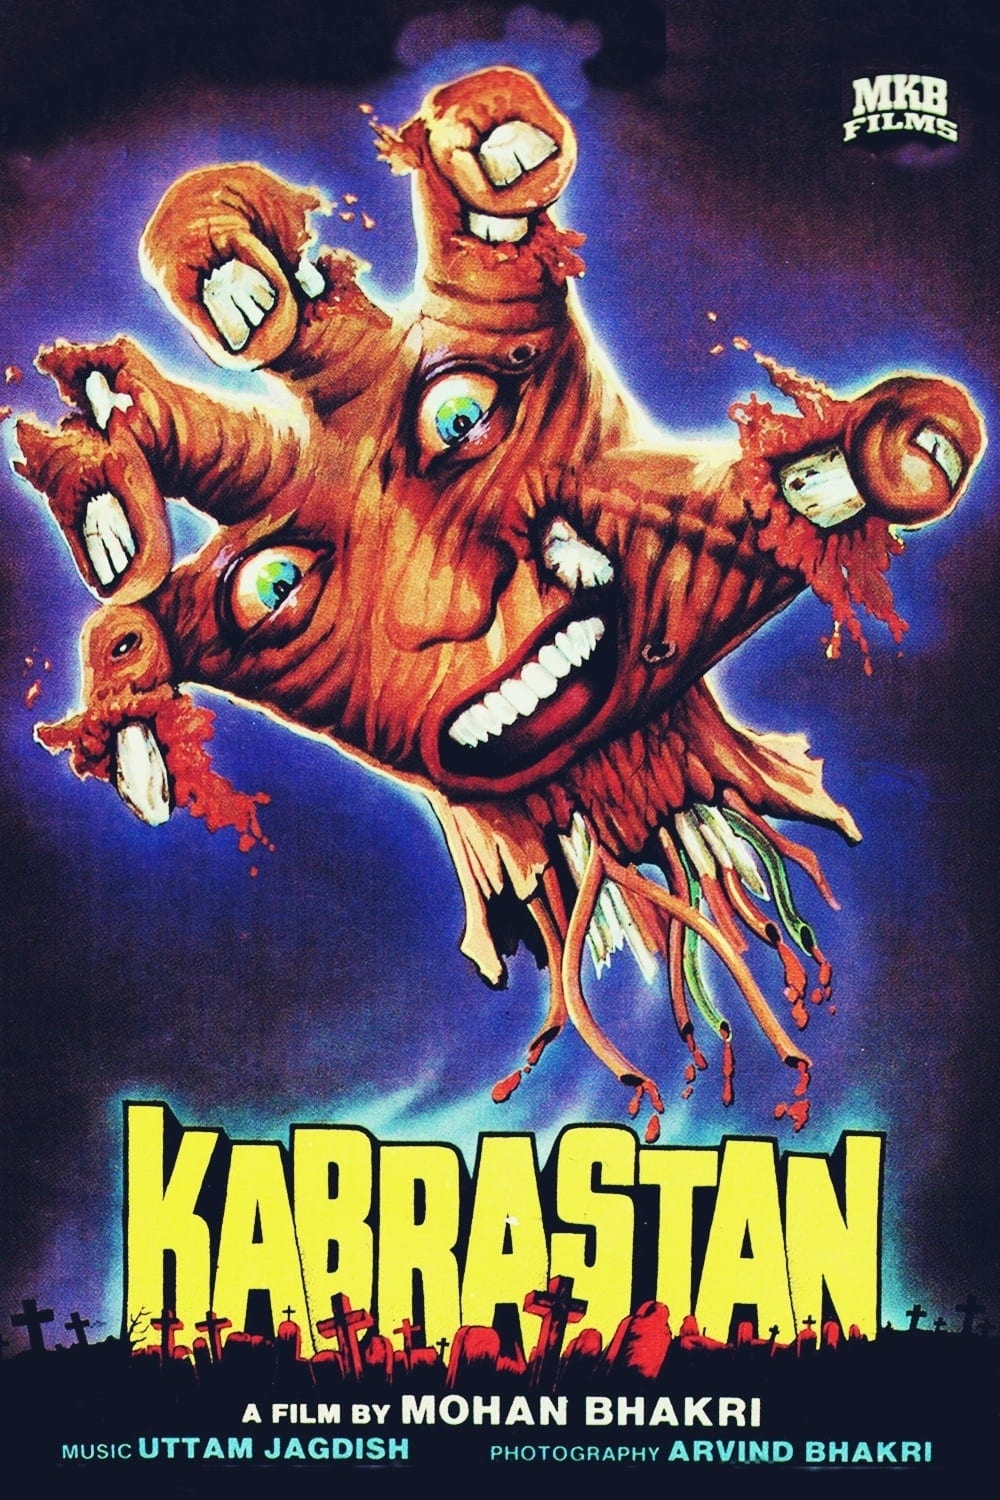 Poster for the movie "Kabrastan"